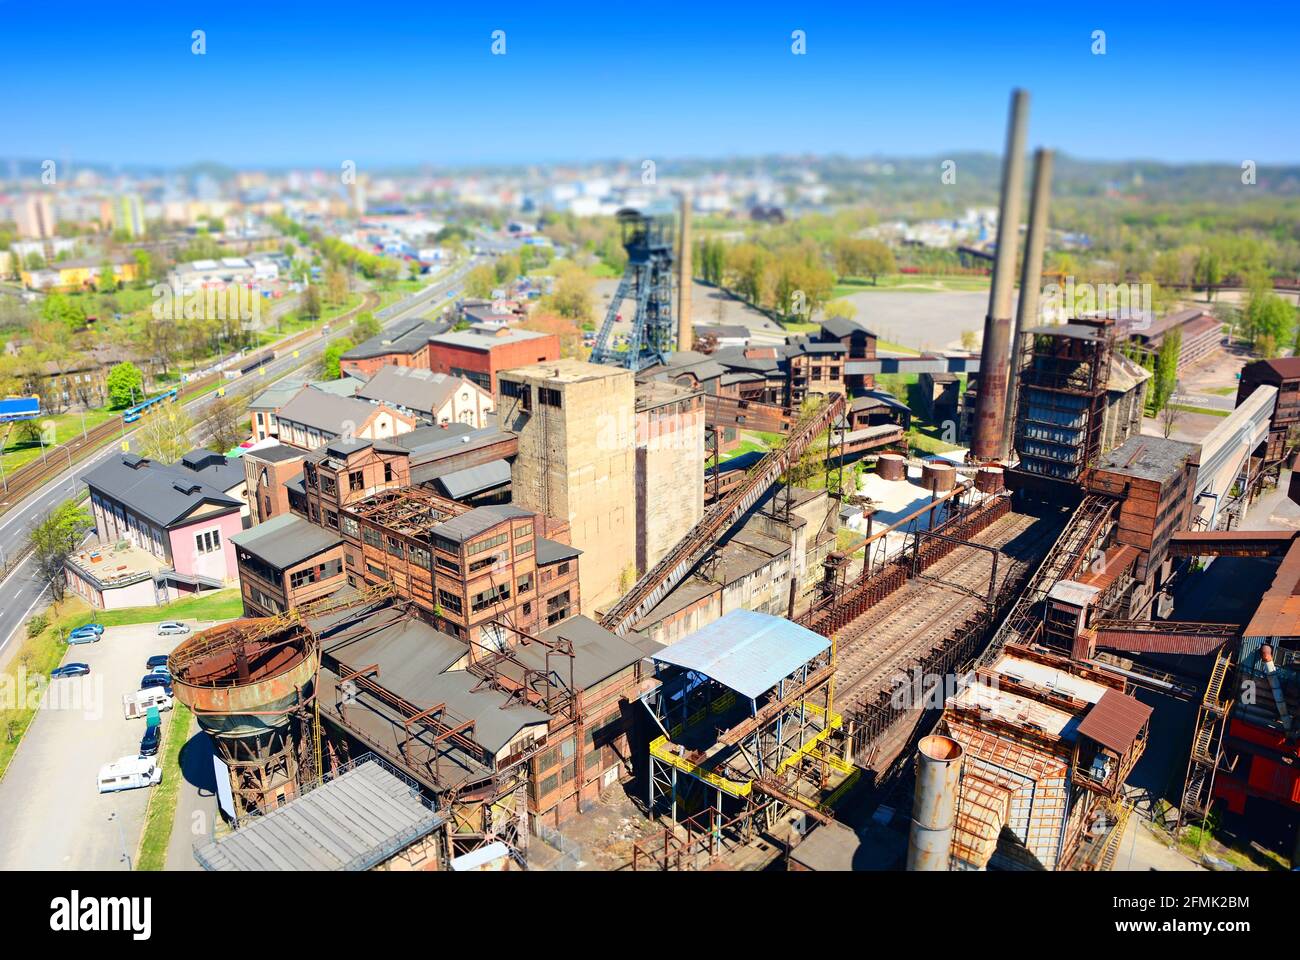 https://c8.alamy.com/comp/2FMK2BM/aerial-view-of-the-old-rusty-abandoned-ironworks-factory-area-with-a-tilt-shift-effect-miniature-tilt-shift-effect-of-the-old-ironworks-factory-2FMK2BM.jpg